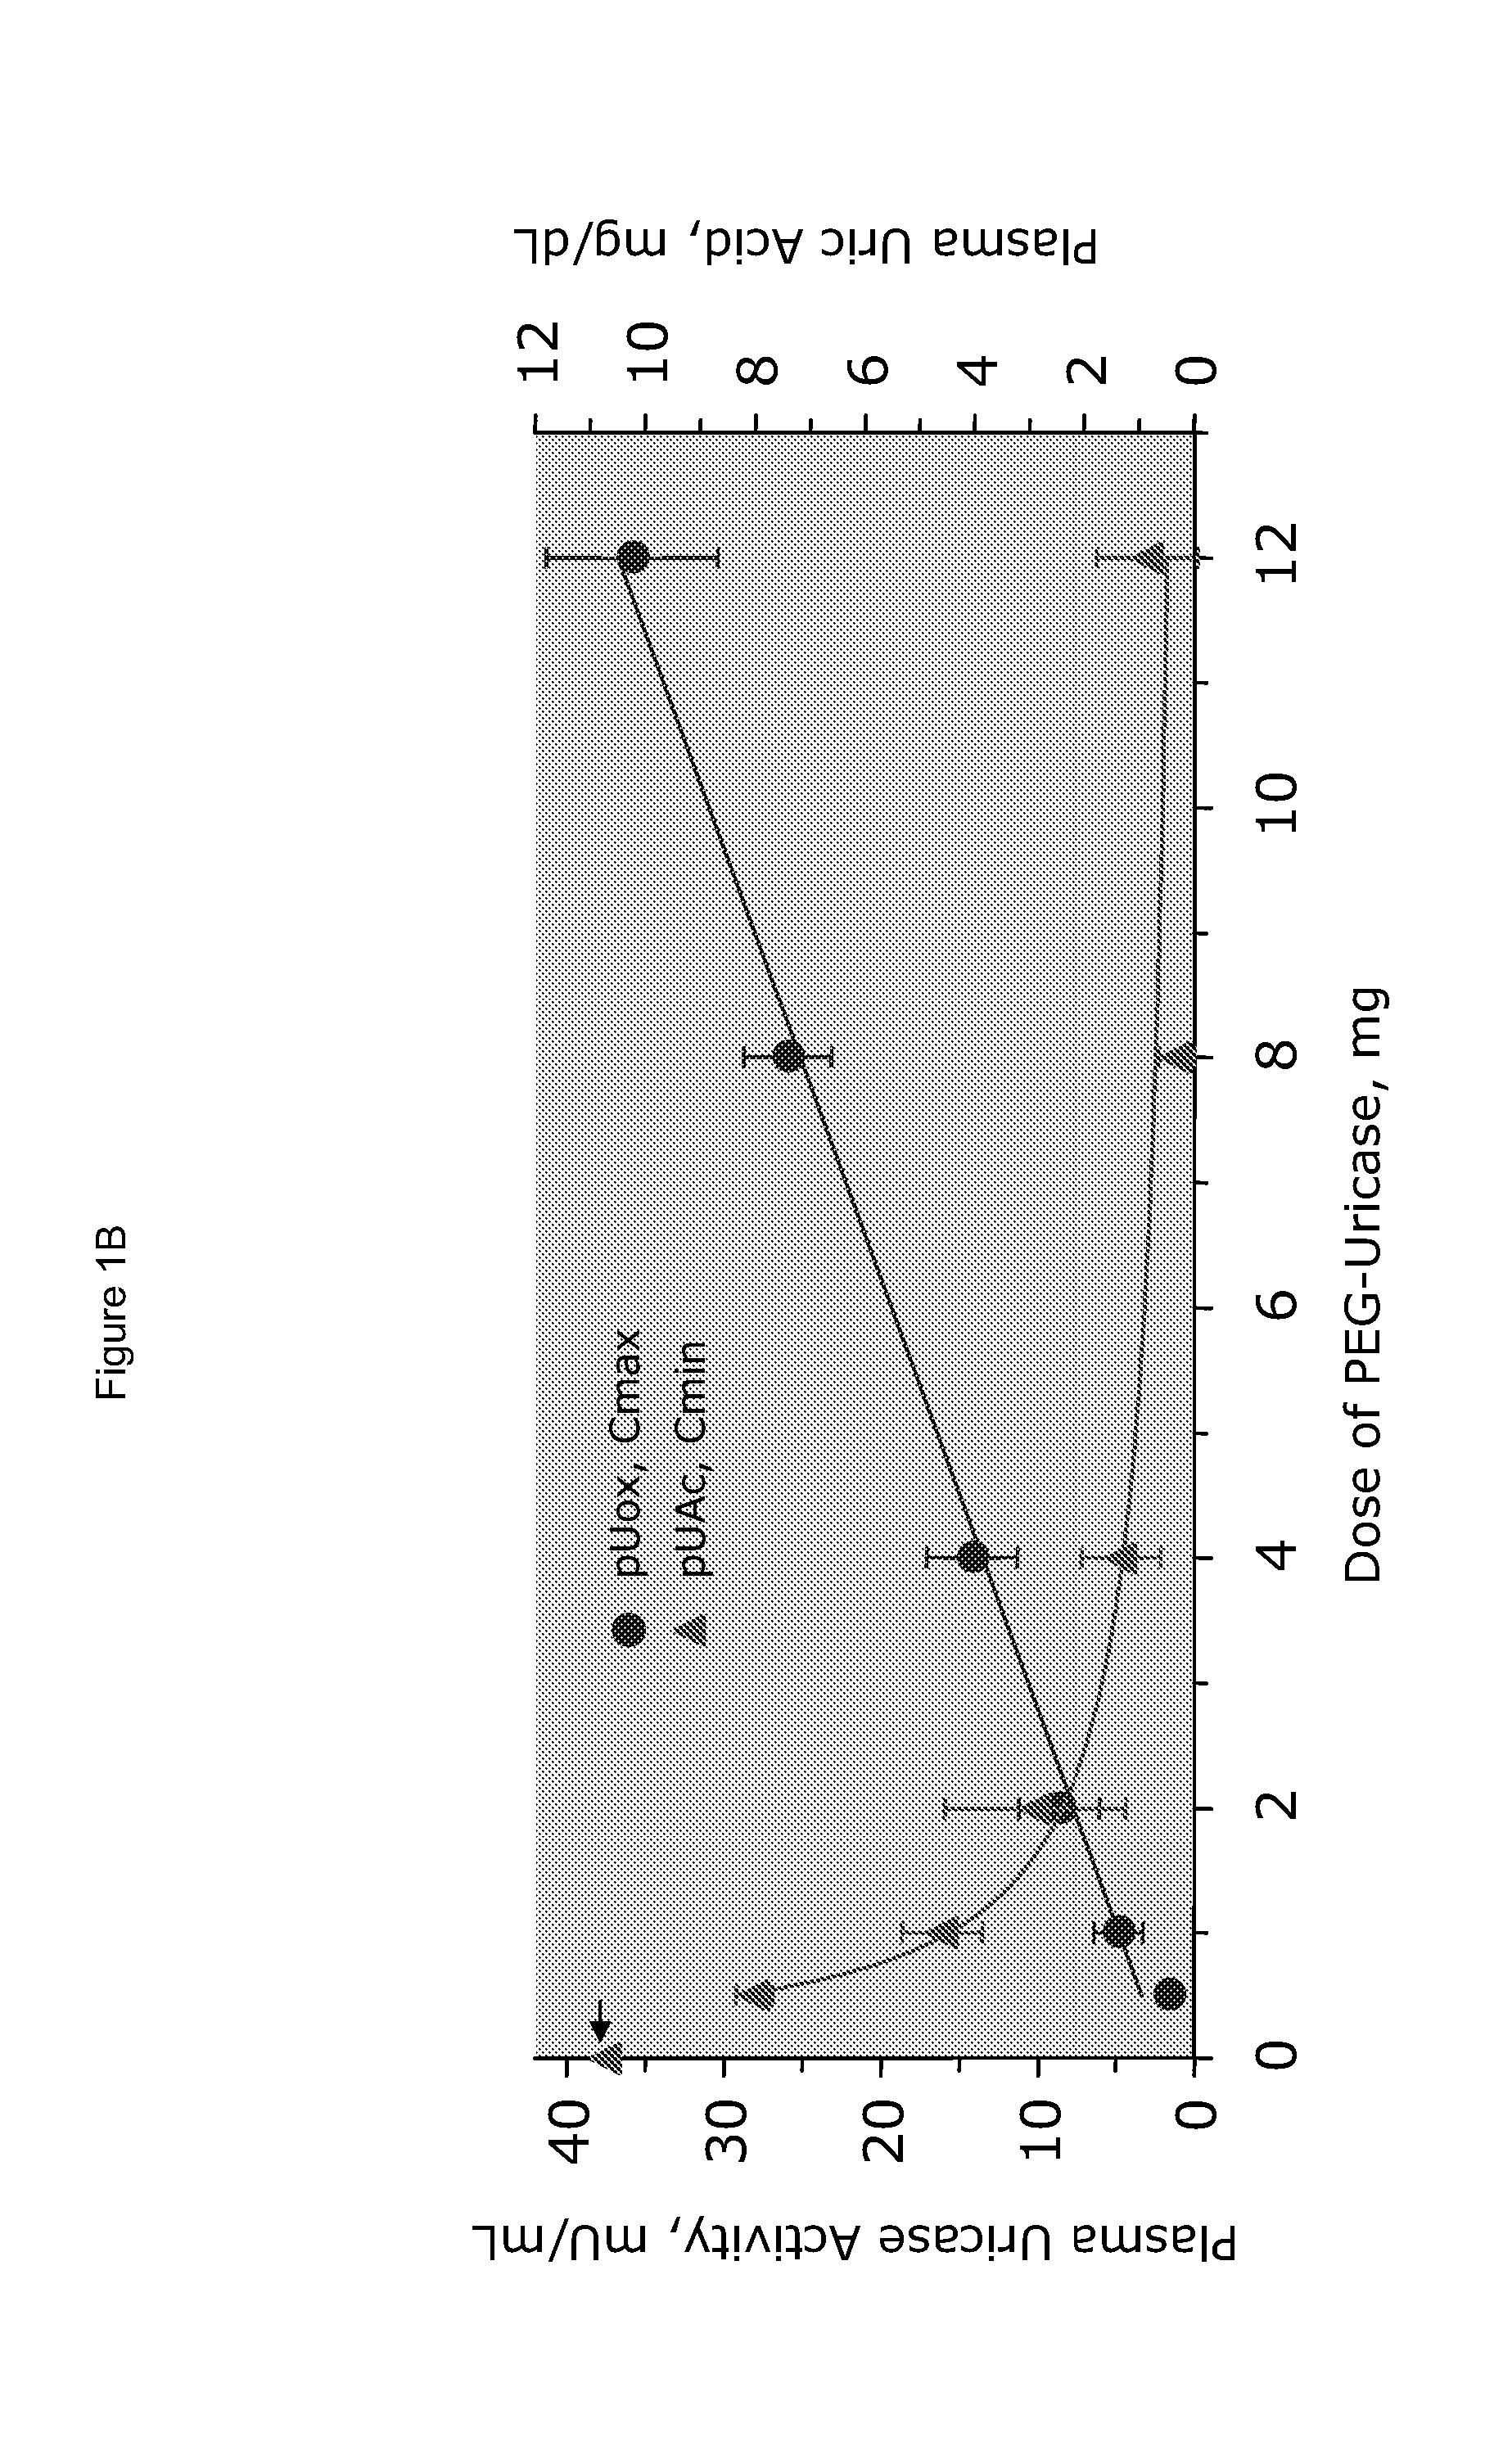 Methods for lowering elevated uric acid levels using intravenous injections of PEG-uricase